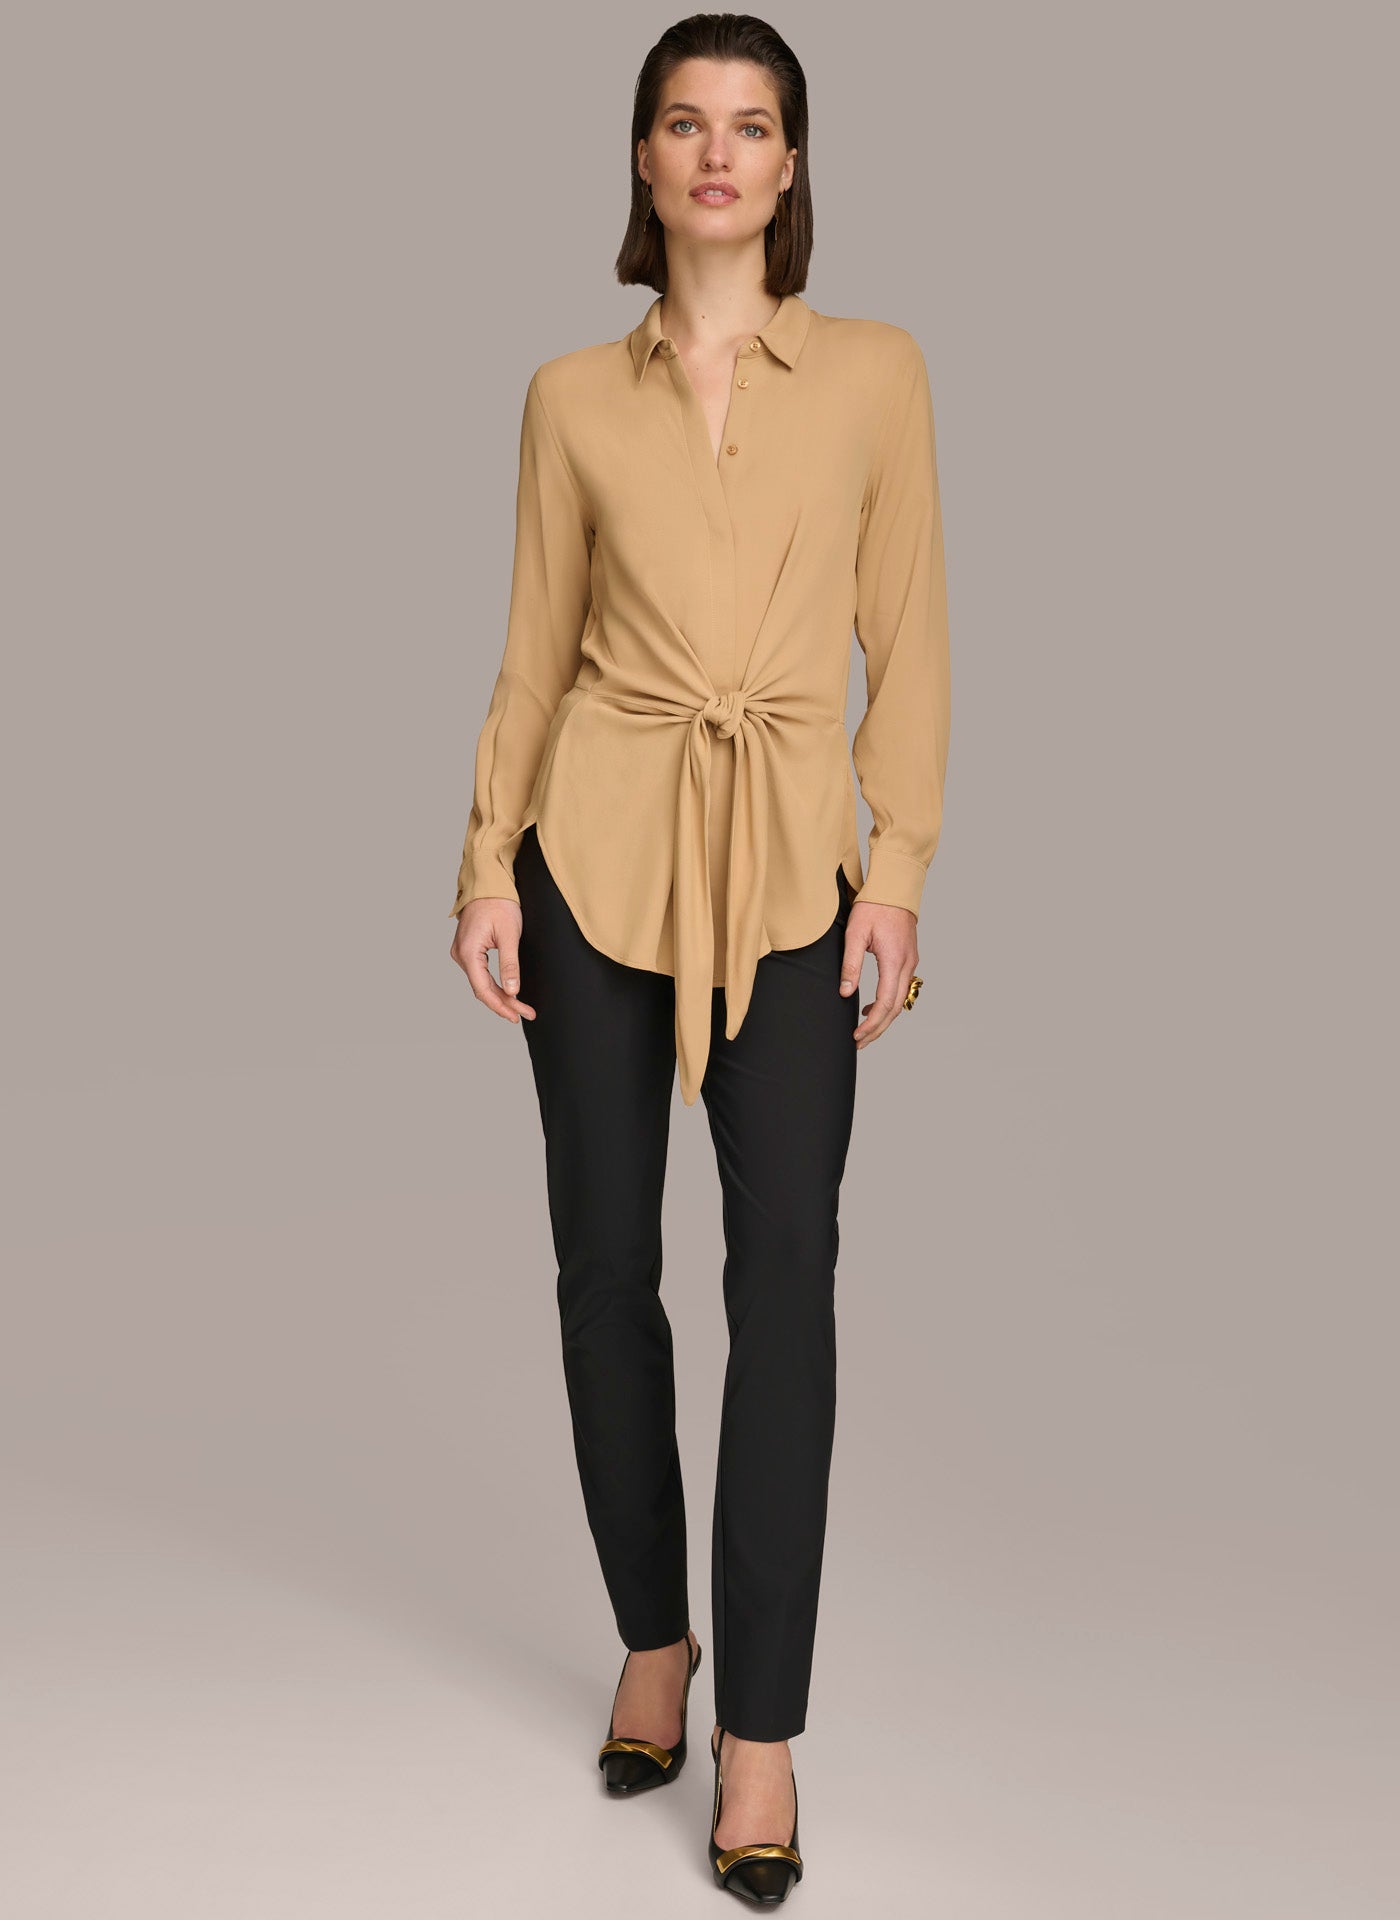 LONG SLEEVE HIGH-LOW WITH TIE AT WAIST